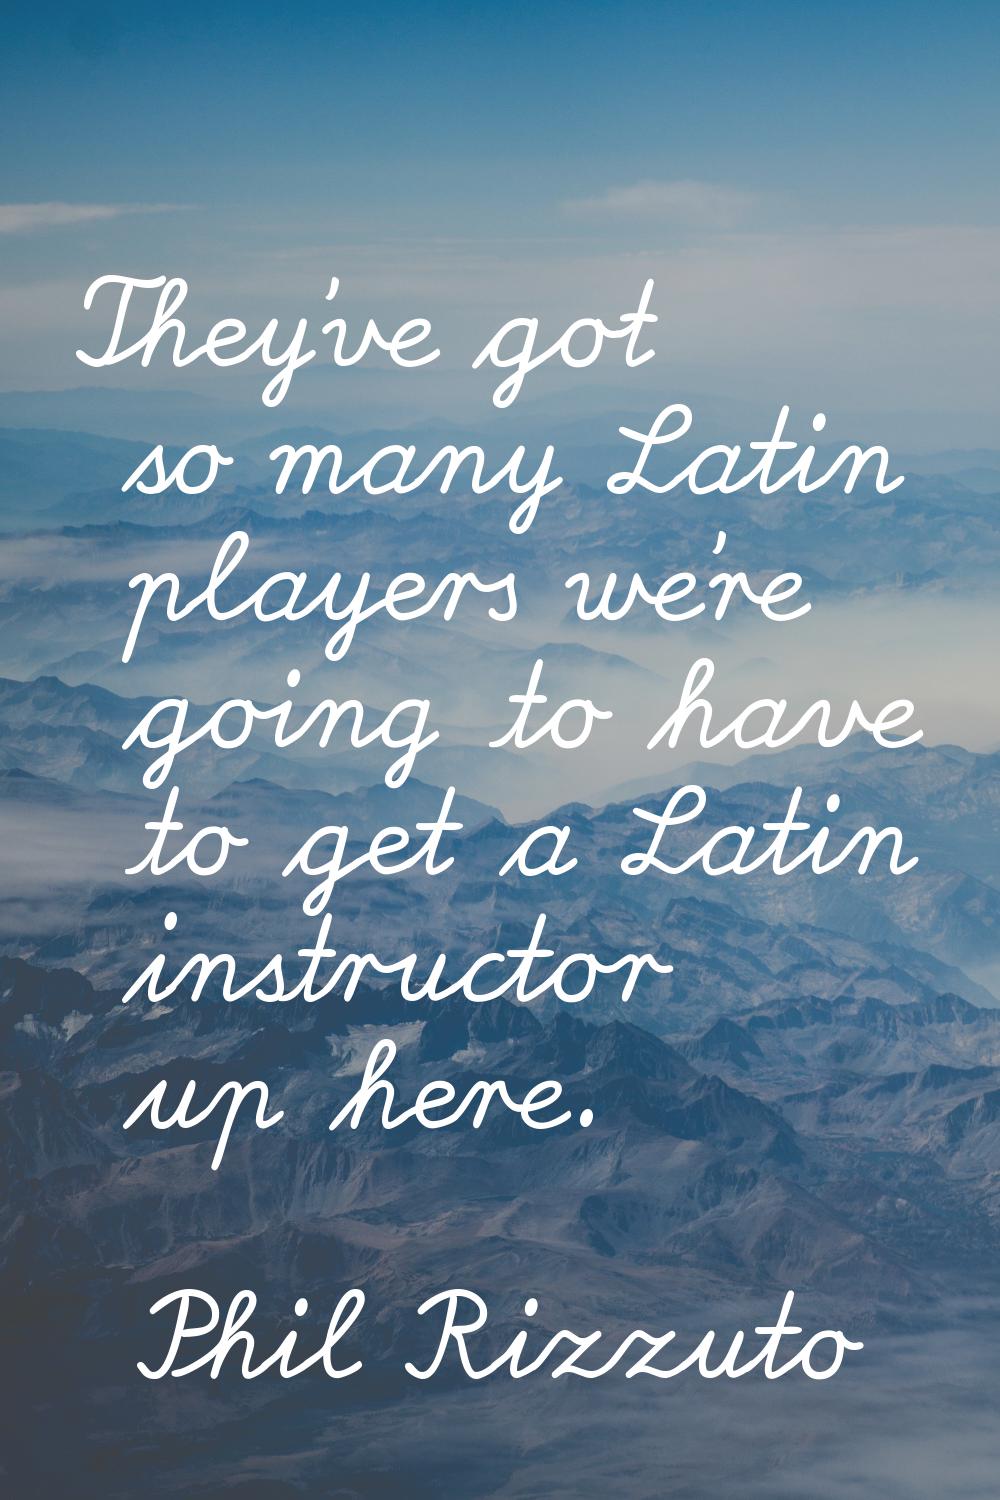 They've got so many Latin players we're going to have to get a Latin instructor up here.